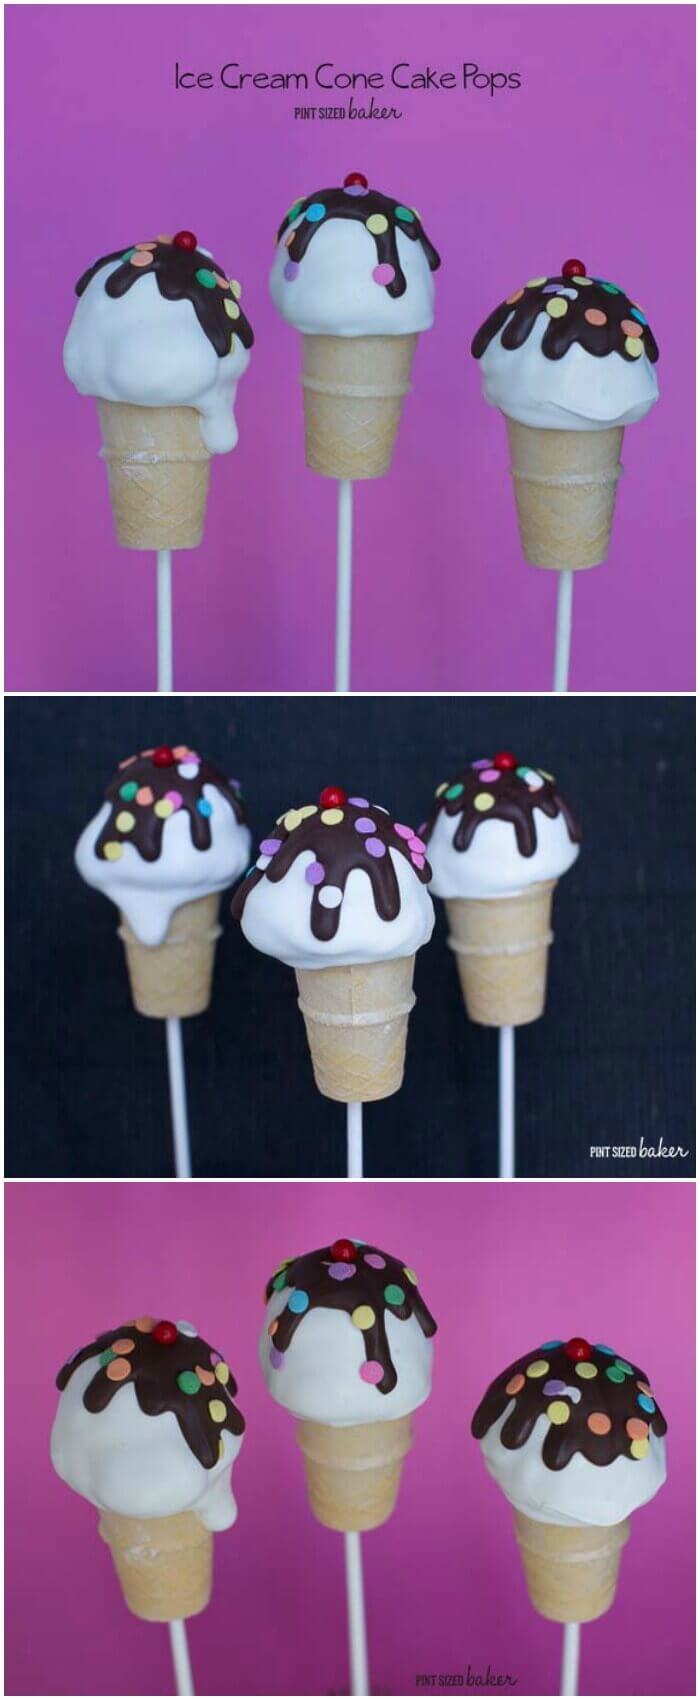 The kids are all gonna SCREAM for these Ice Cream Cone Cake Pops! Easy to make and fun the kids! Watch the video on the blog.